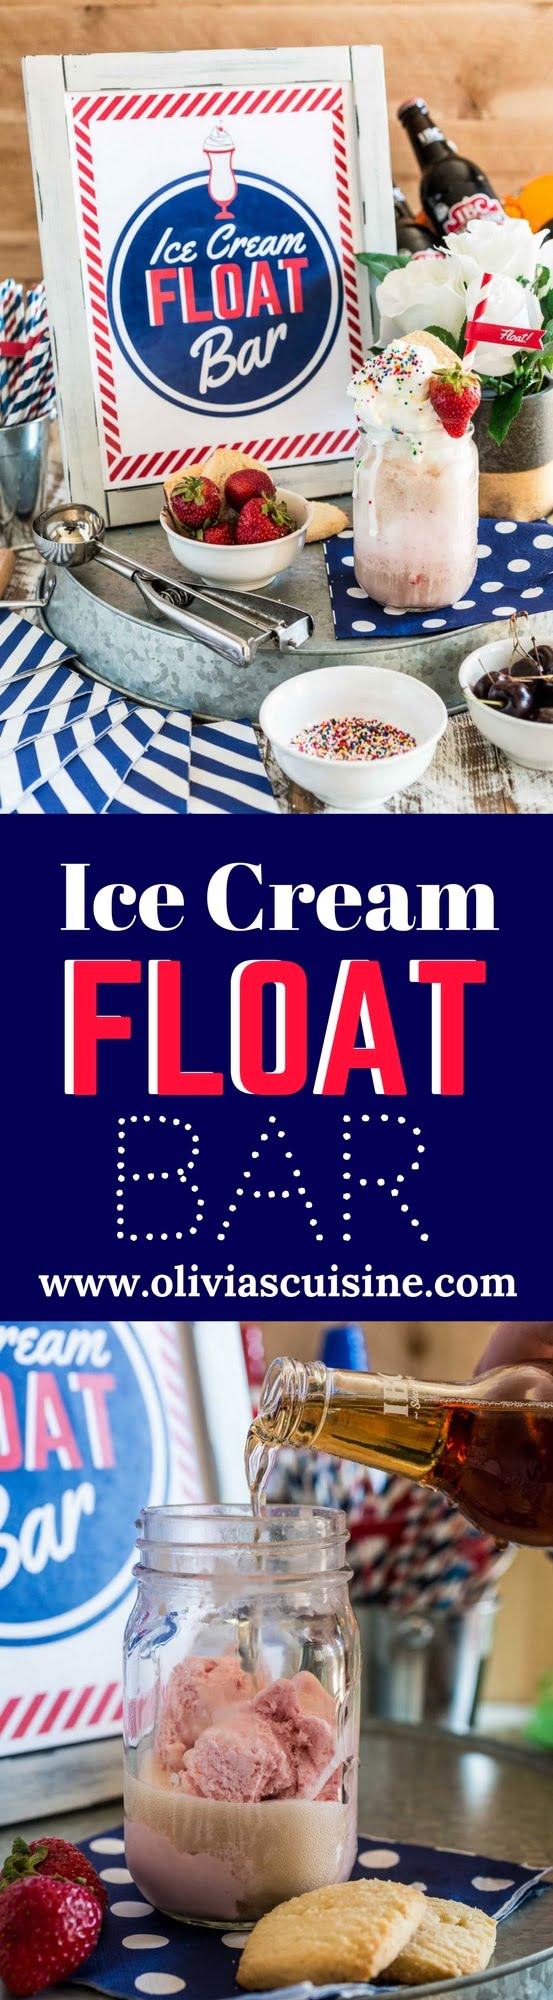 Ice Cream Float Bar | www.oliviascuisine.com | How fun would it be to set up a retro Ice Cream Float Bar at your next party? Not only is it entertaining for the kiddos, but the grown ups will love to relive their childhoods!